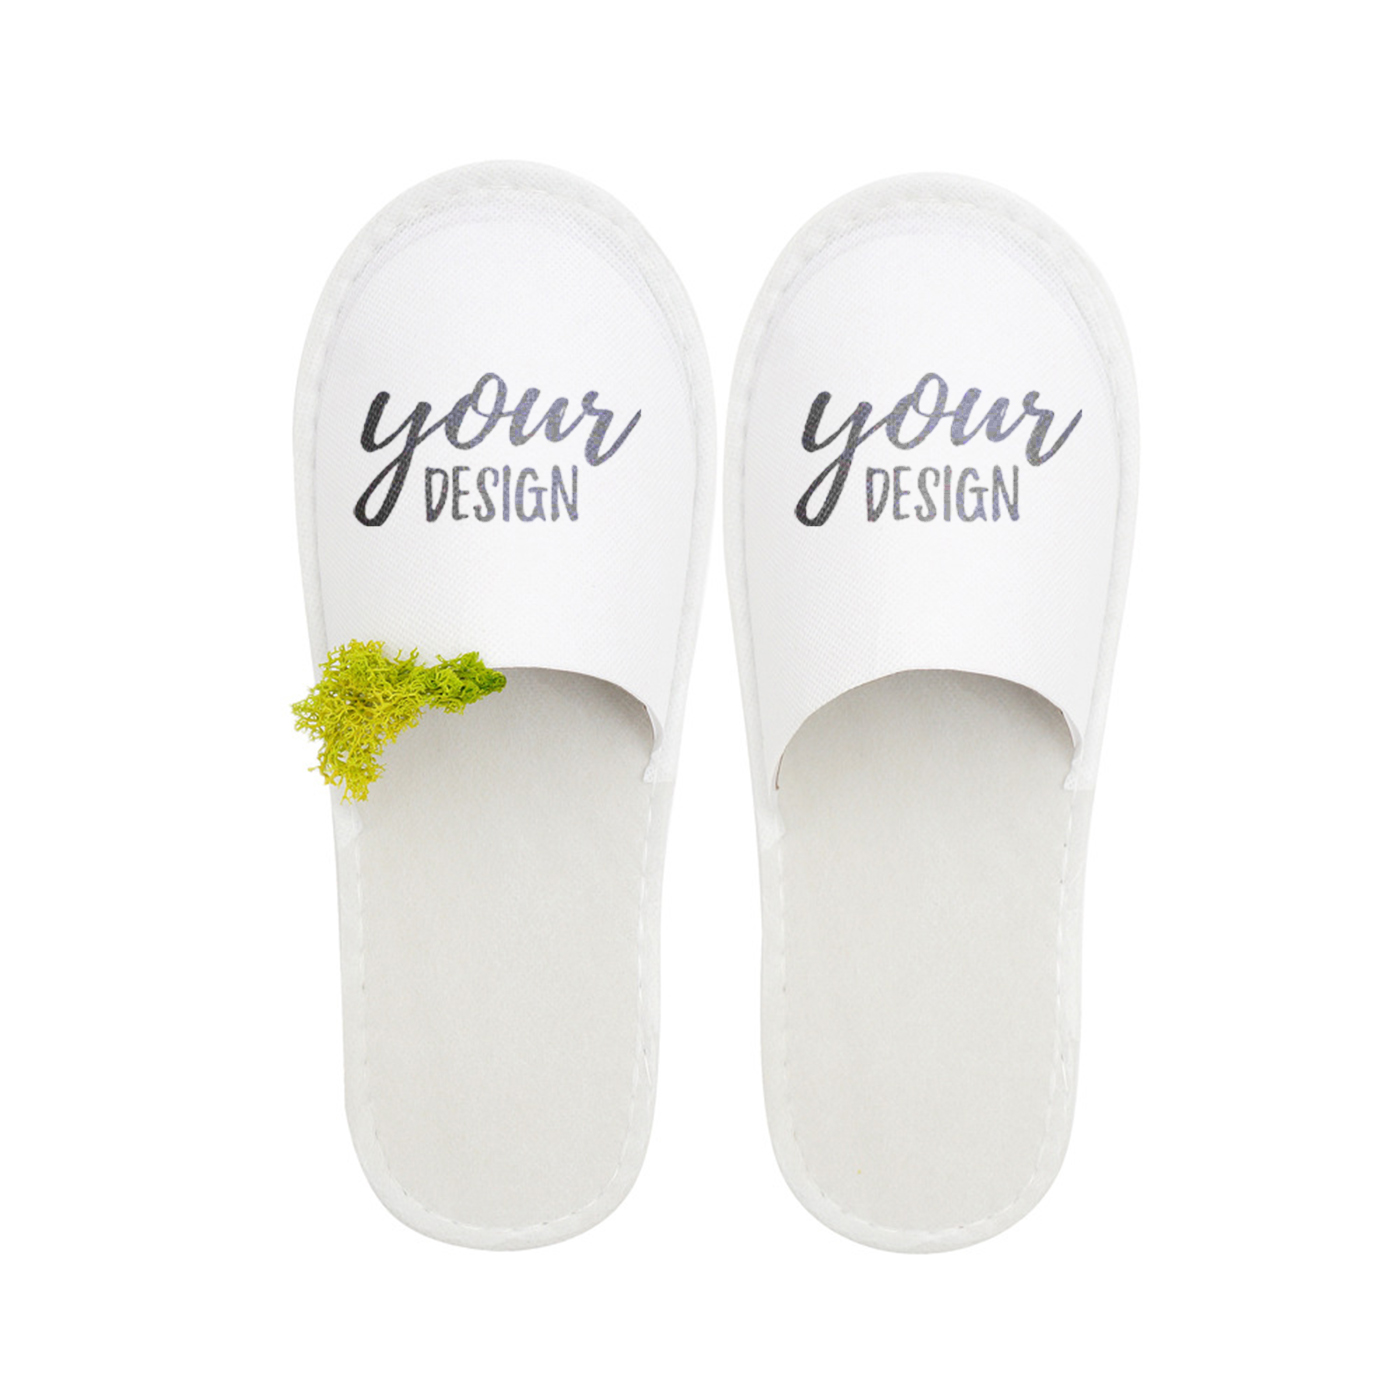 Promo Disposable Hotel Slippers1